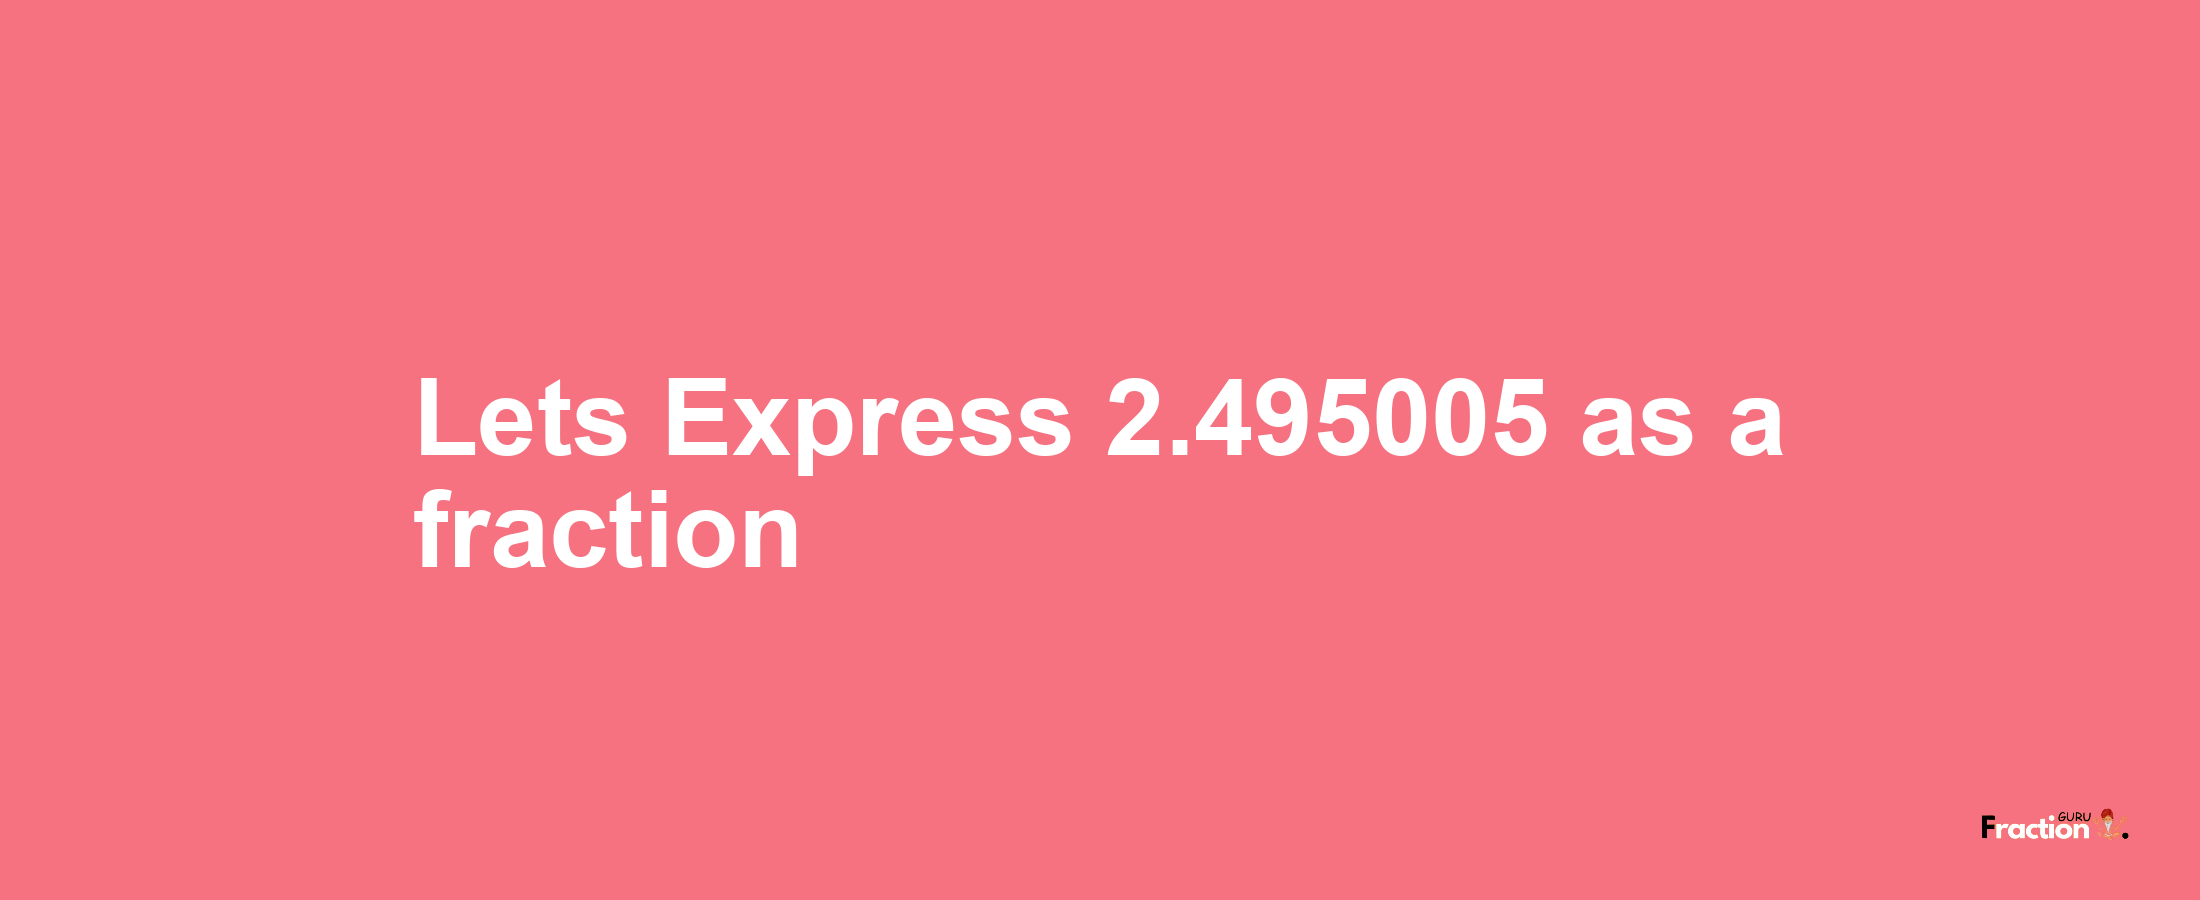 Lets Express 2.495005 as afraction